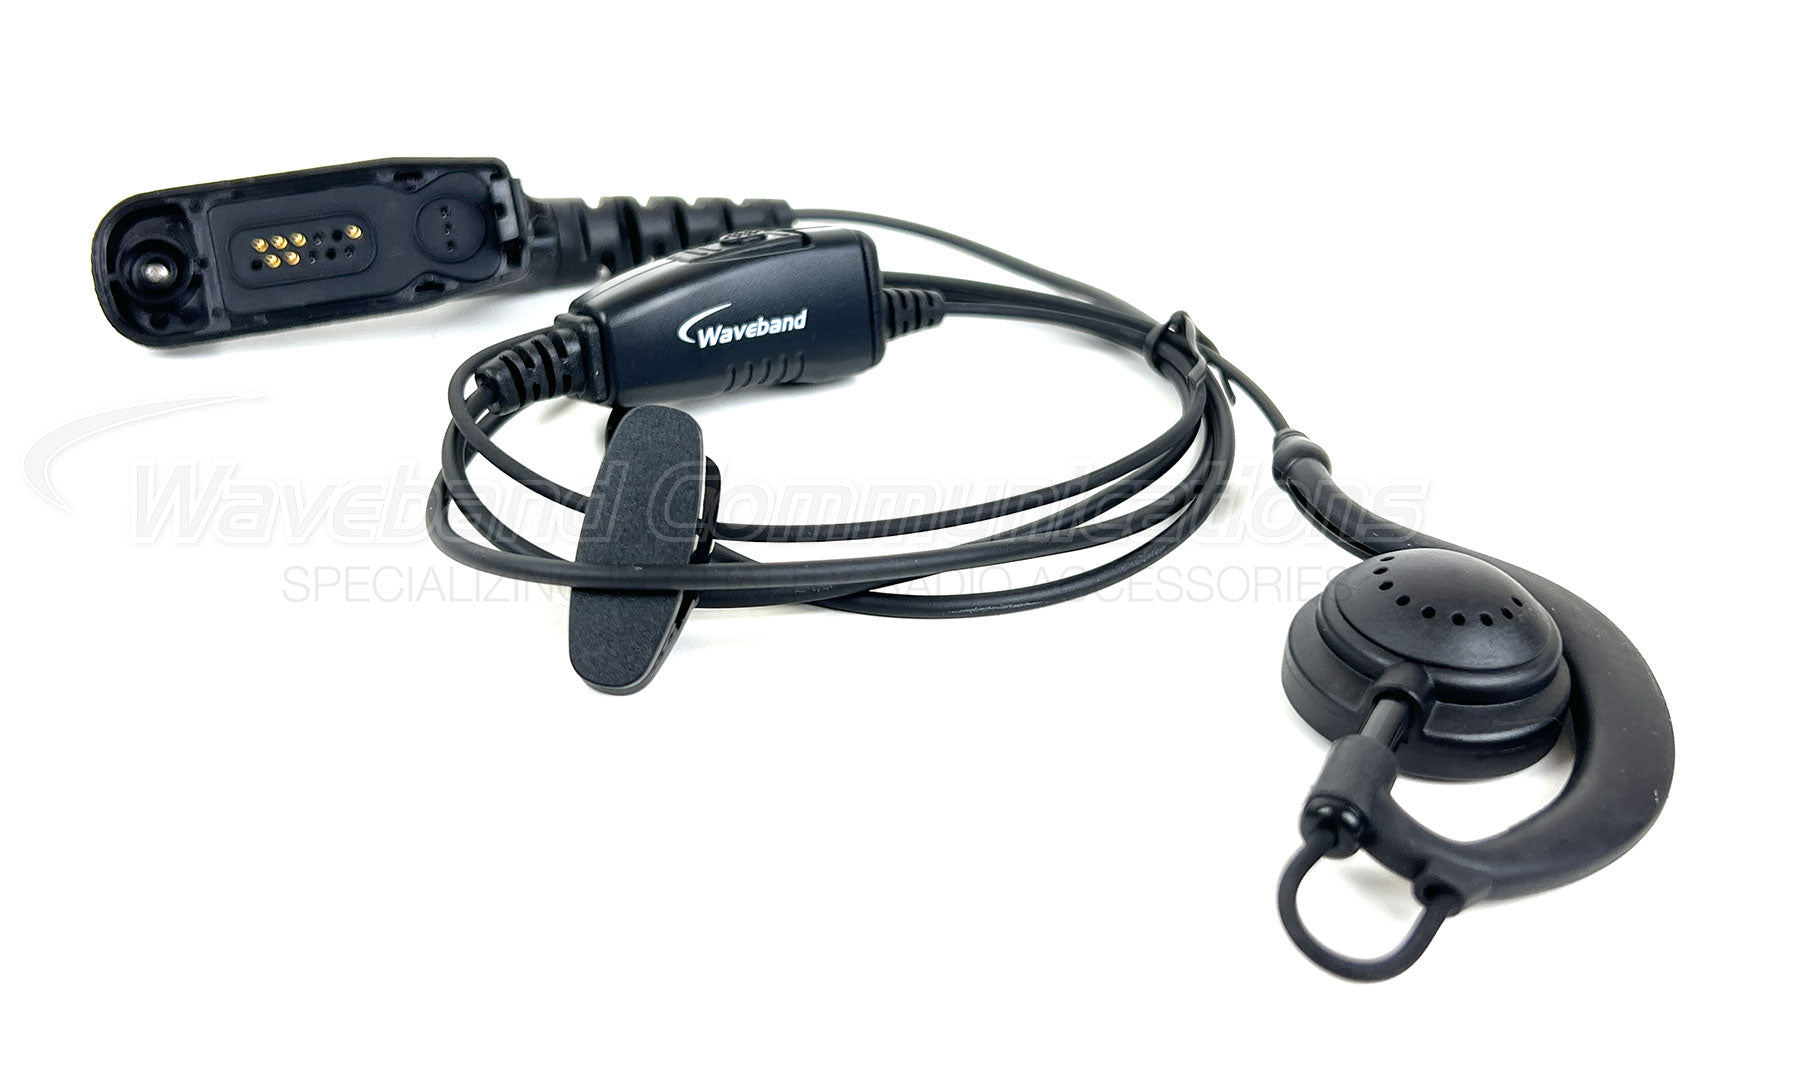 Motorola XPR 6500 One Wire Surveillance Kit with Loop Earpiece